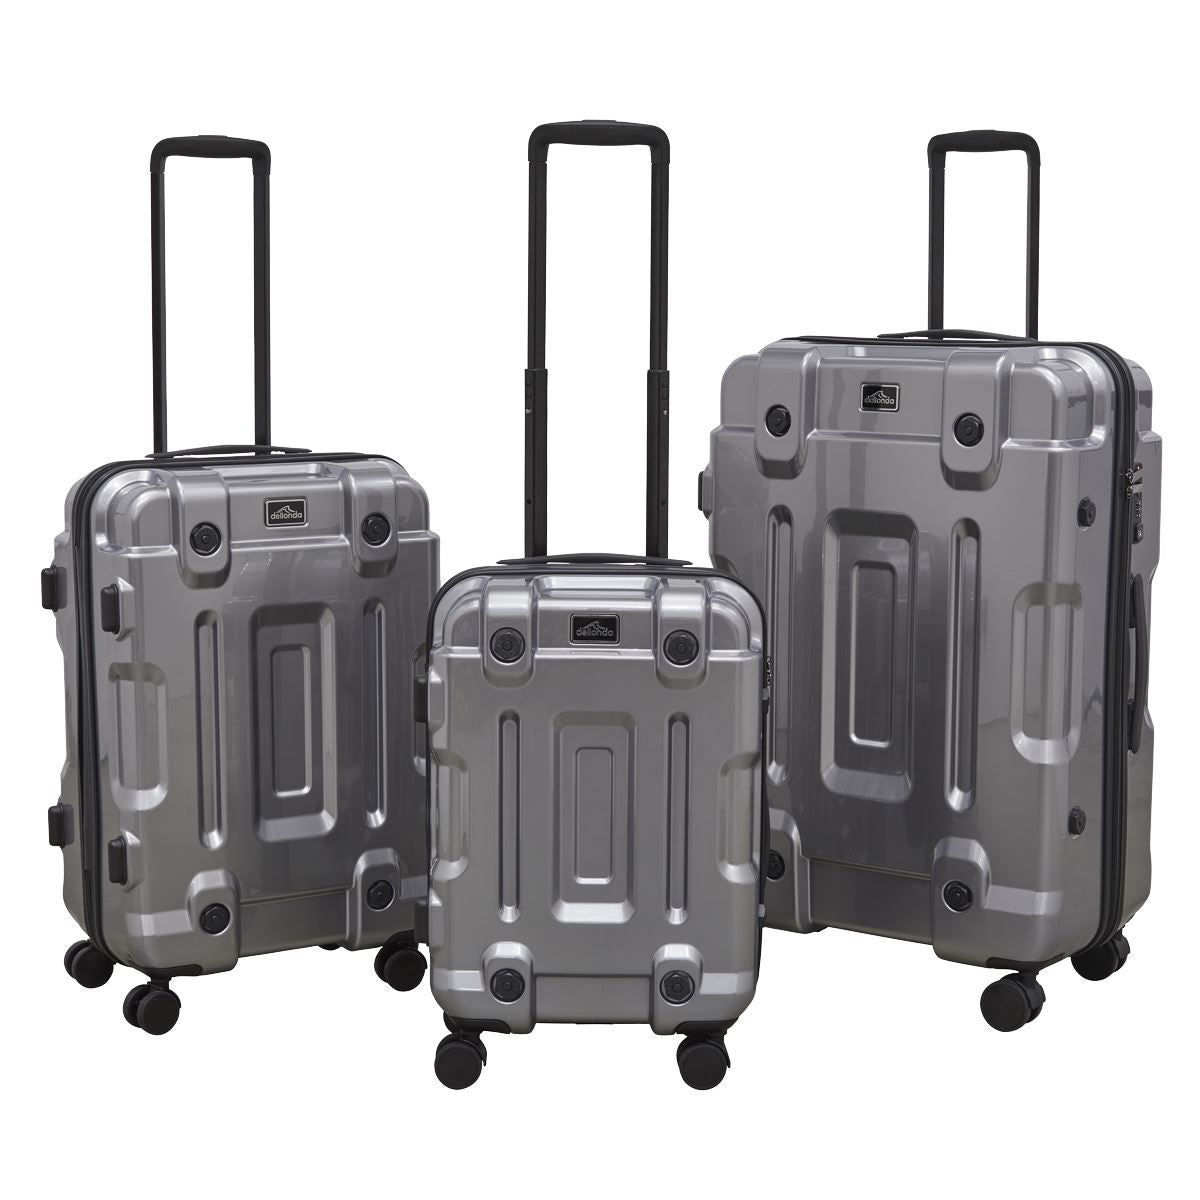 Dellonda 3pc Lightweight ABS Luggage Set  - 20", 24", 28" - Silver - DL9